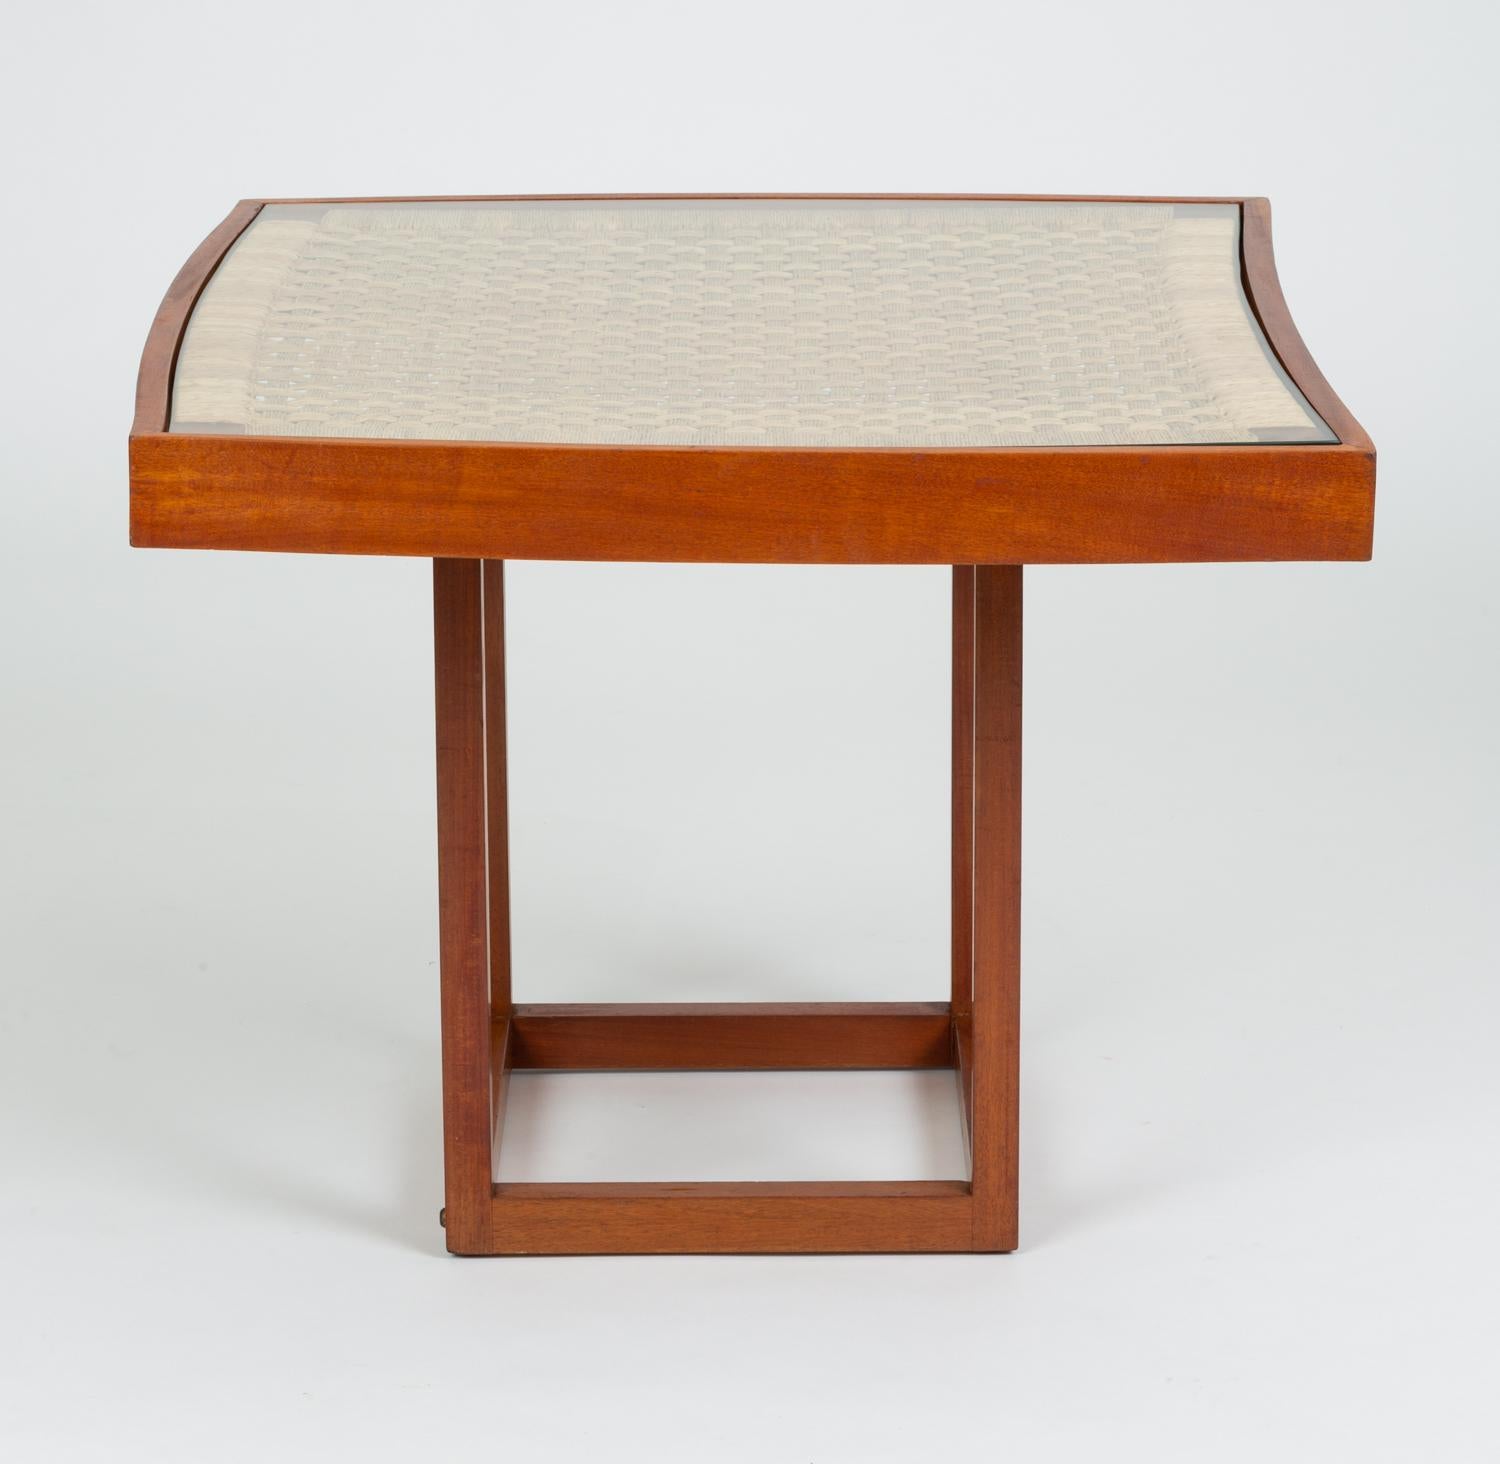 Mid-Century Modern Convertible Coffee or Dining Table by Michael van Beuren for Domus Mexico